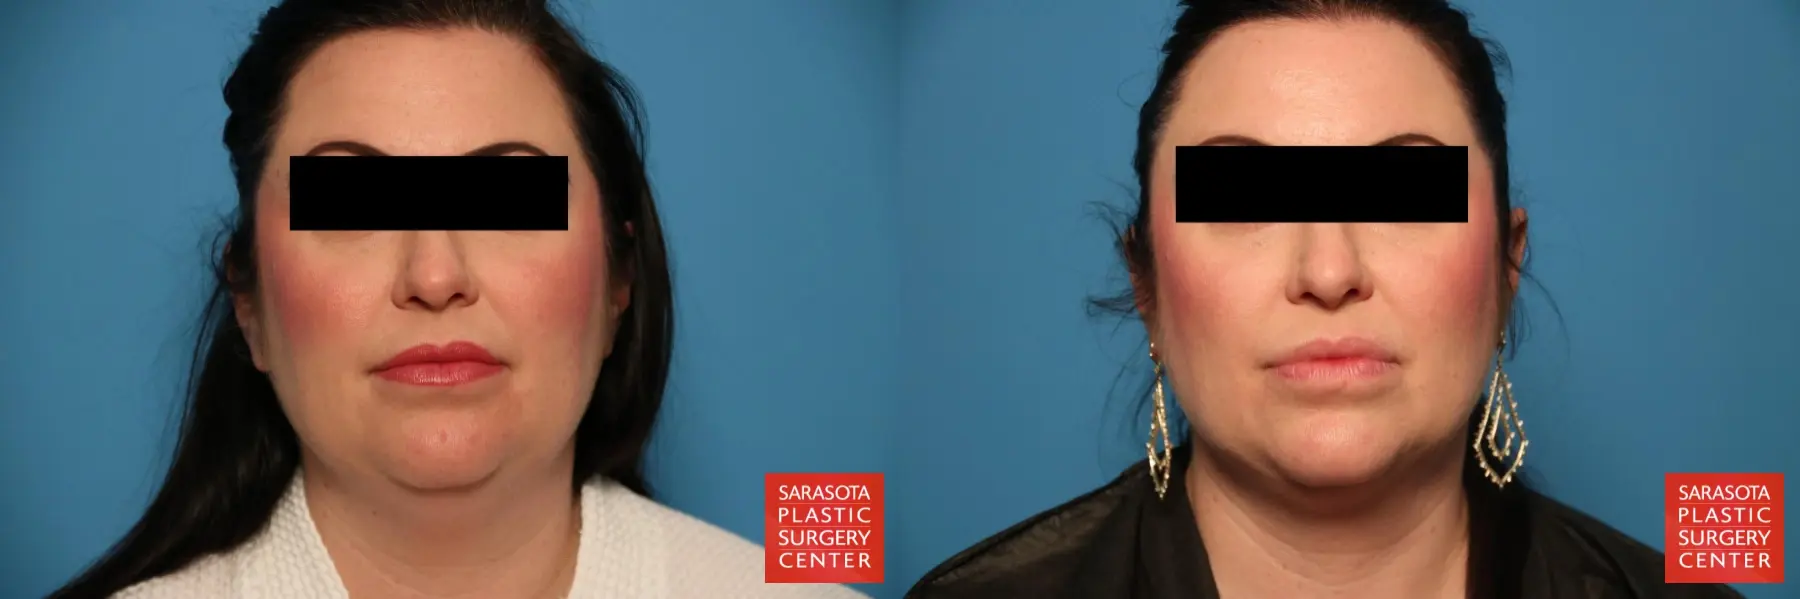 Facial Liposuction: Patient 1 - Before and After  